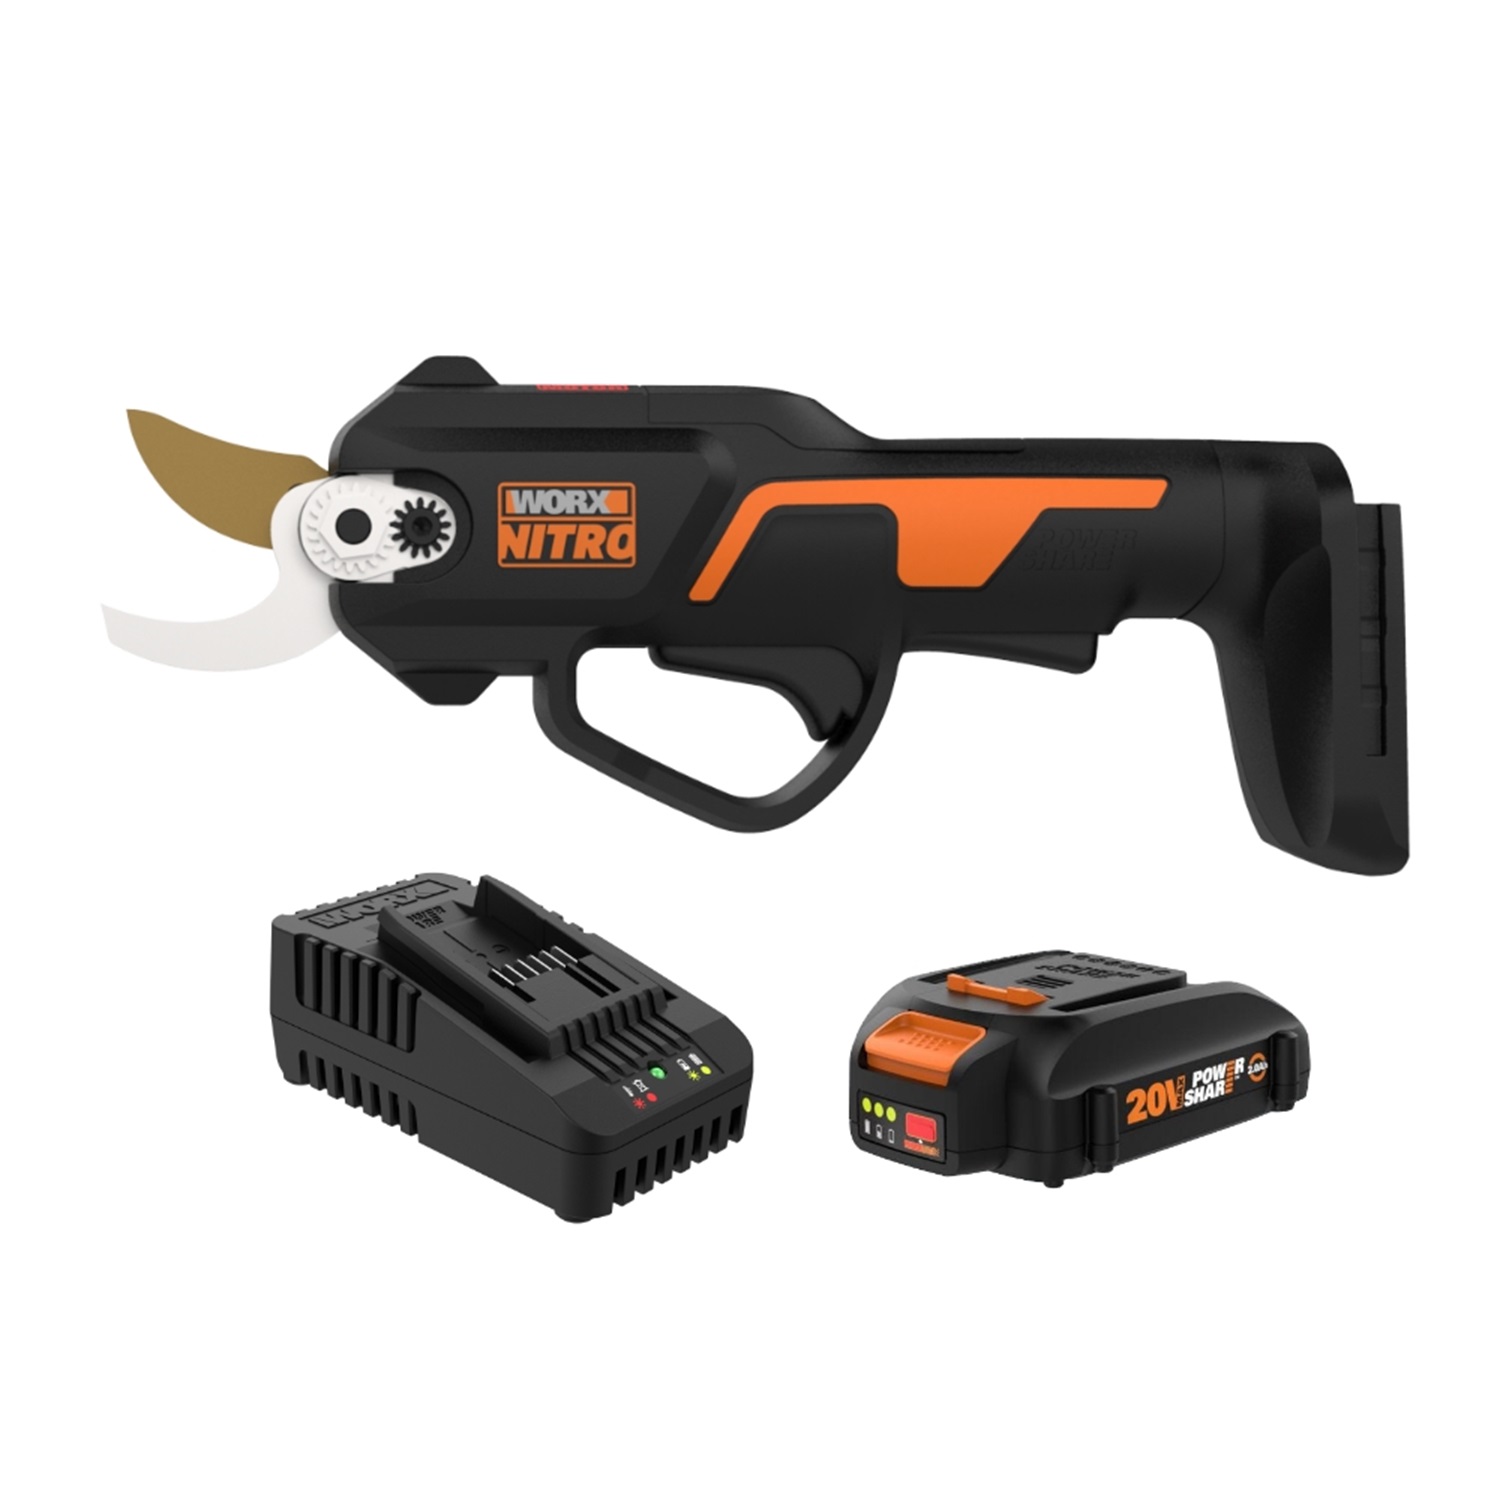 WORX 20V Cordless Brushless Pruning Shear (1 x 2.0 Ah Batteries and 1 x  Charger) Black WG330 - Best Buy